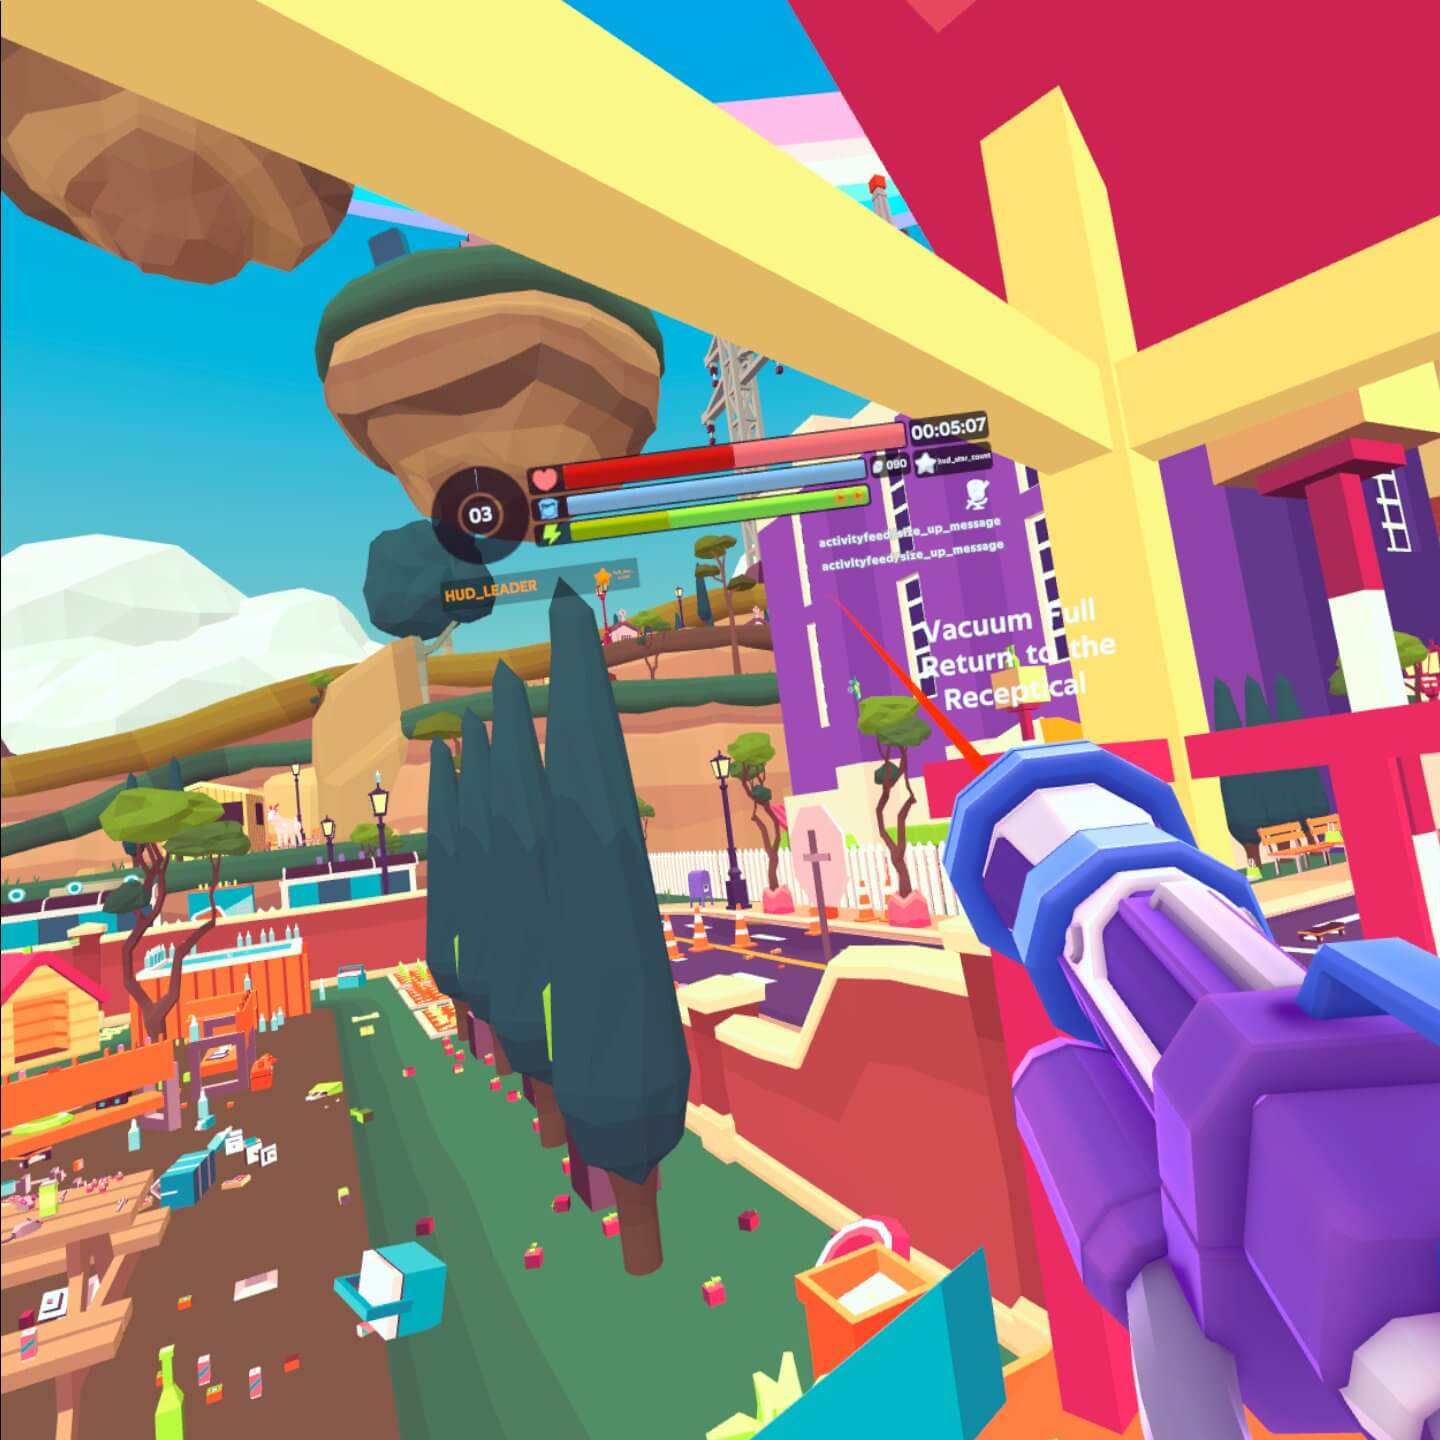 A screenshot showing the map for the VR game called Suck It!